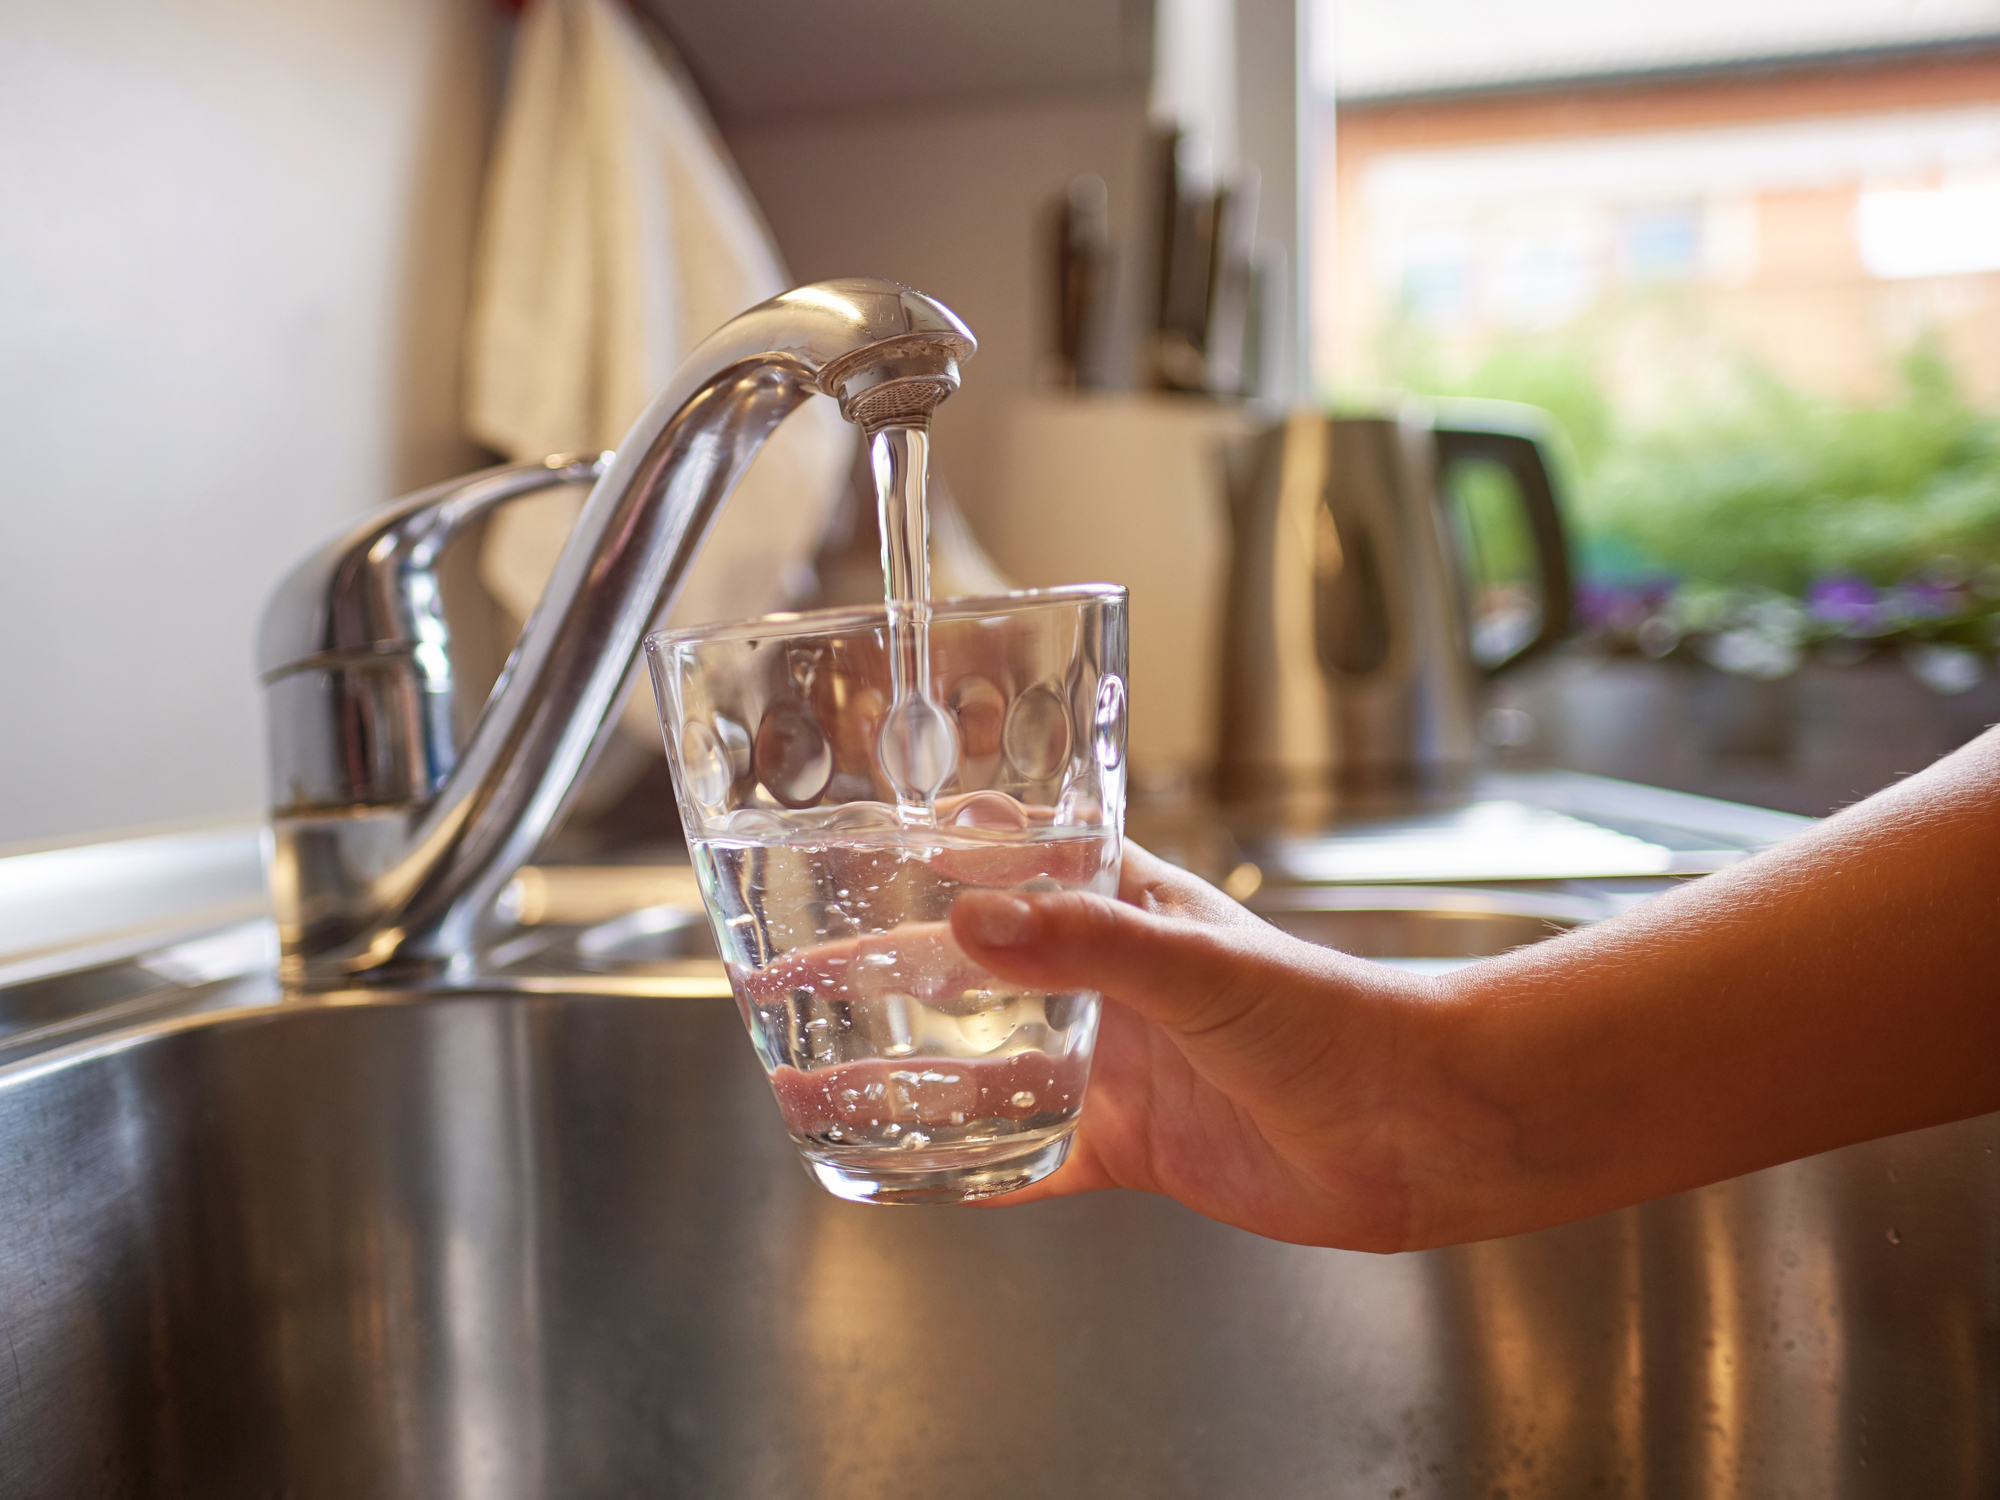 Forget lead! Cancer’s lurking in your water